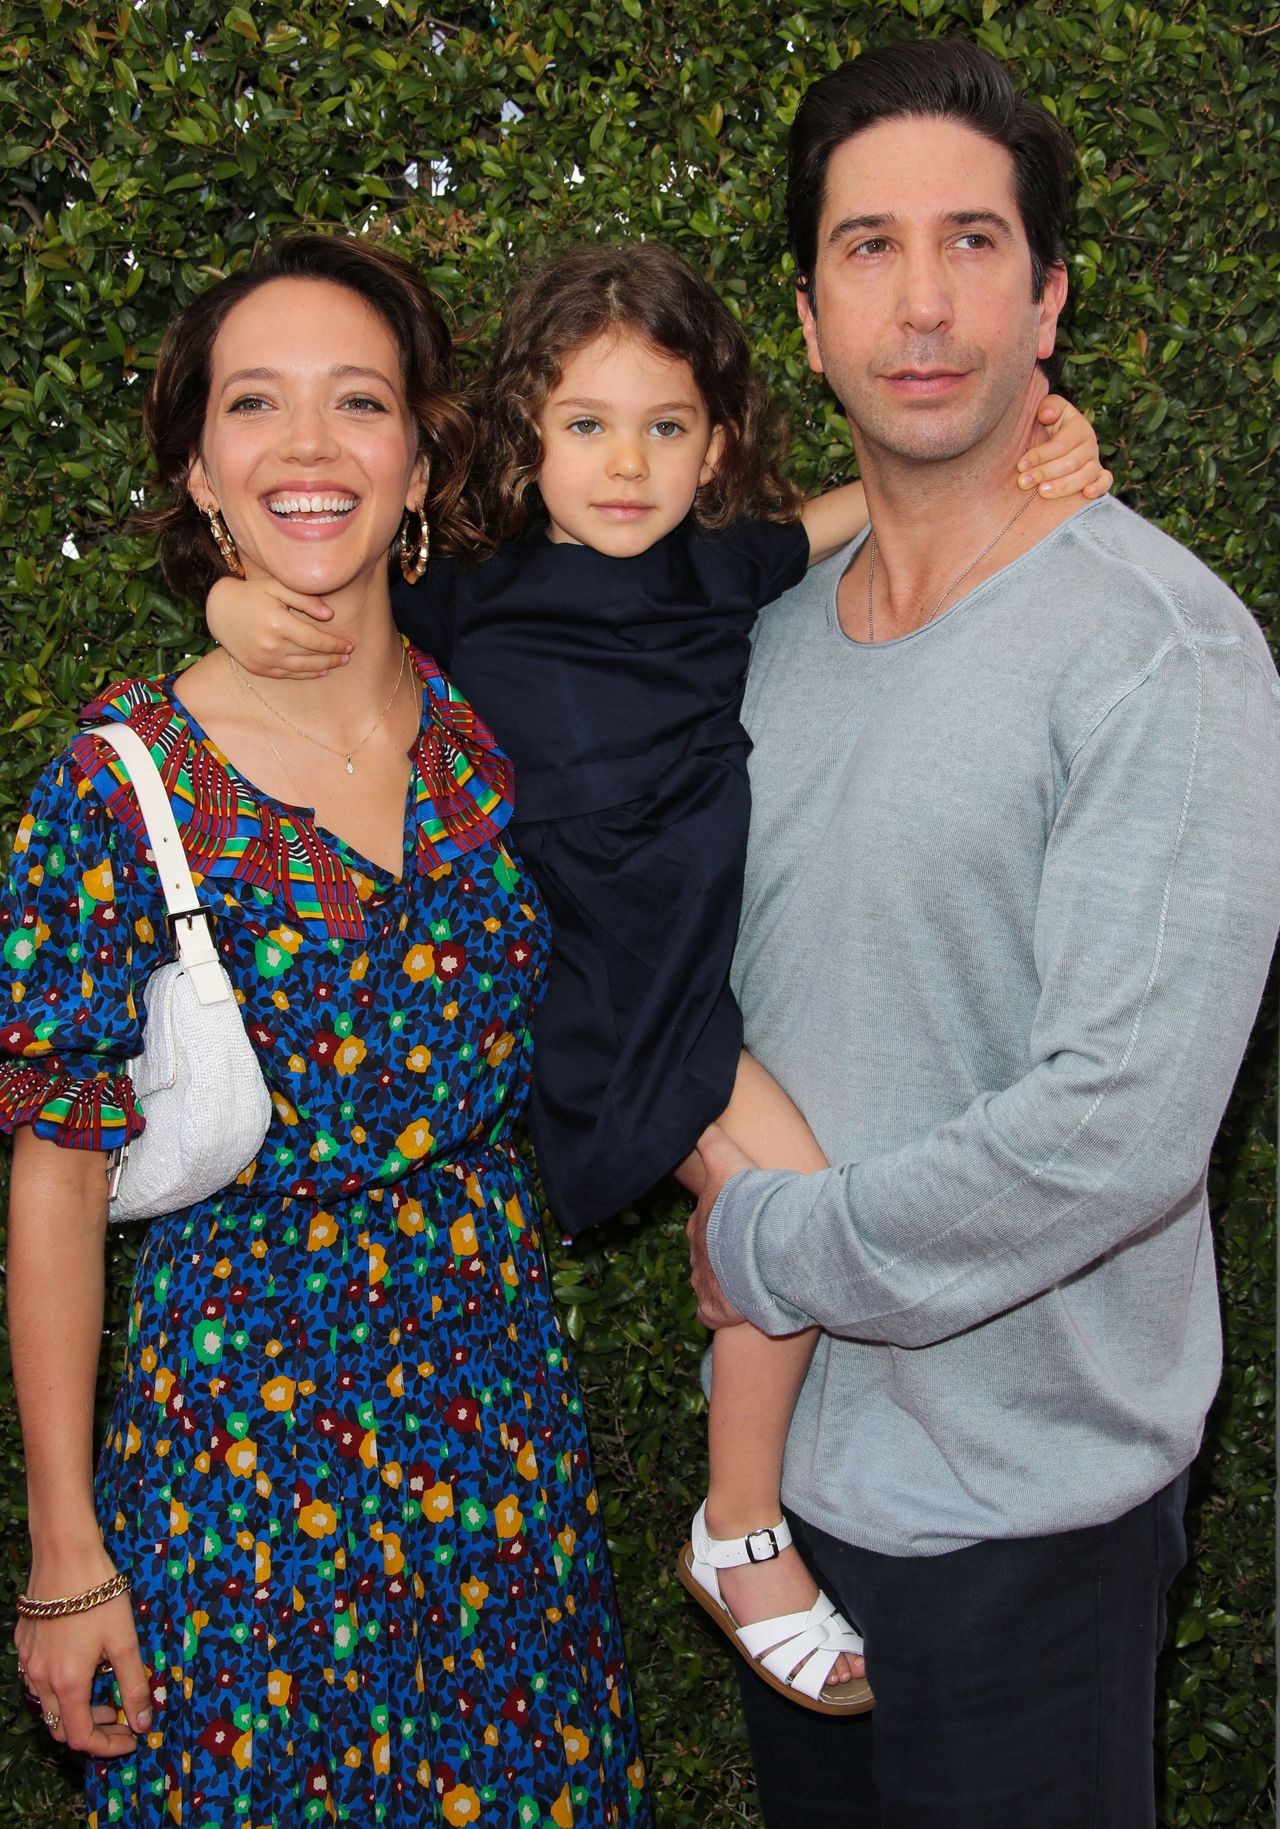 David Schwimmer and Zoe Buckman have welcomed a daughter, Cloe.